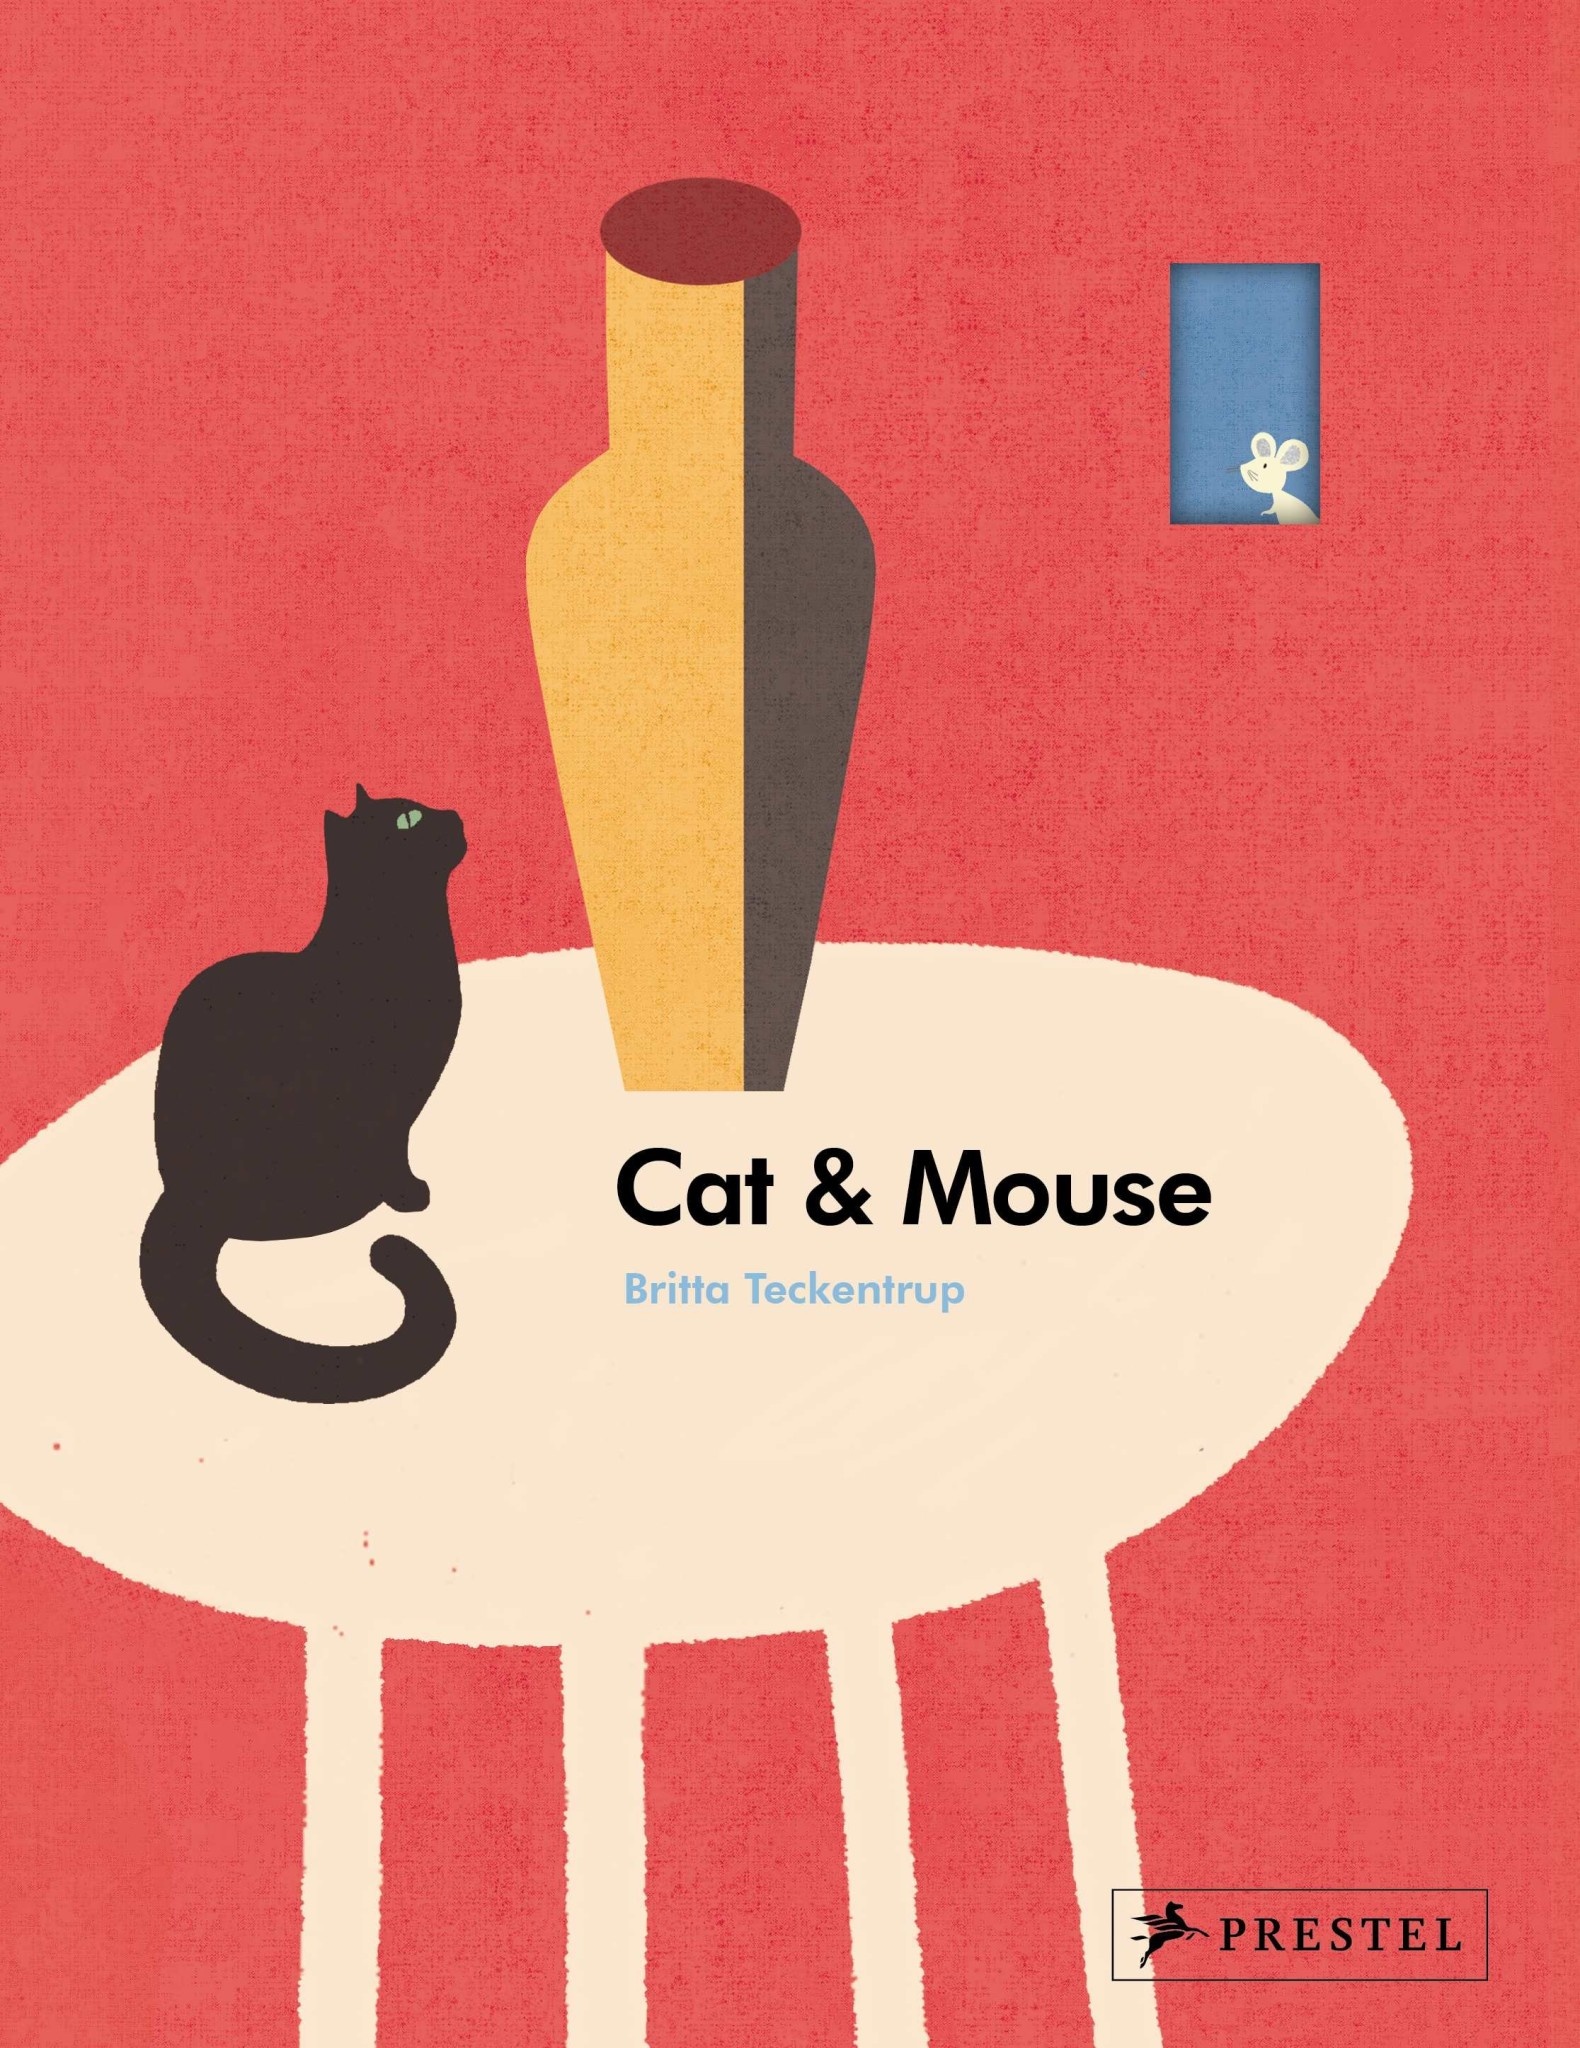 Cat & Mouse by Britta Teckentrup (ages 1-3)